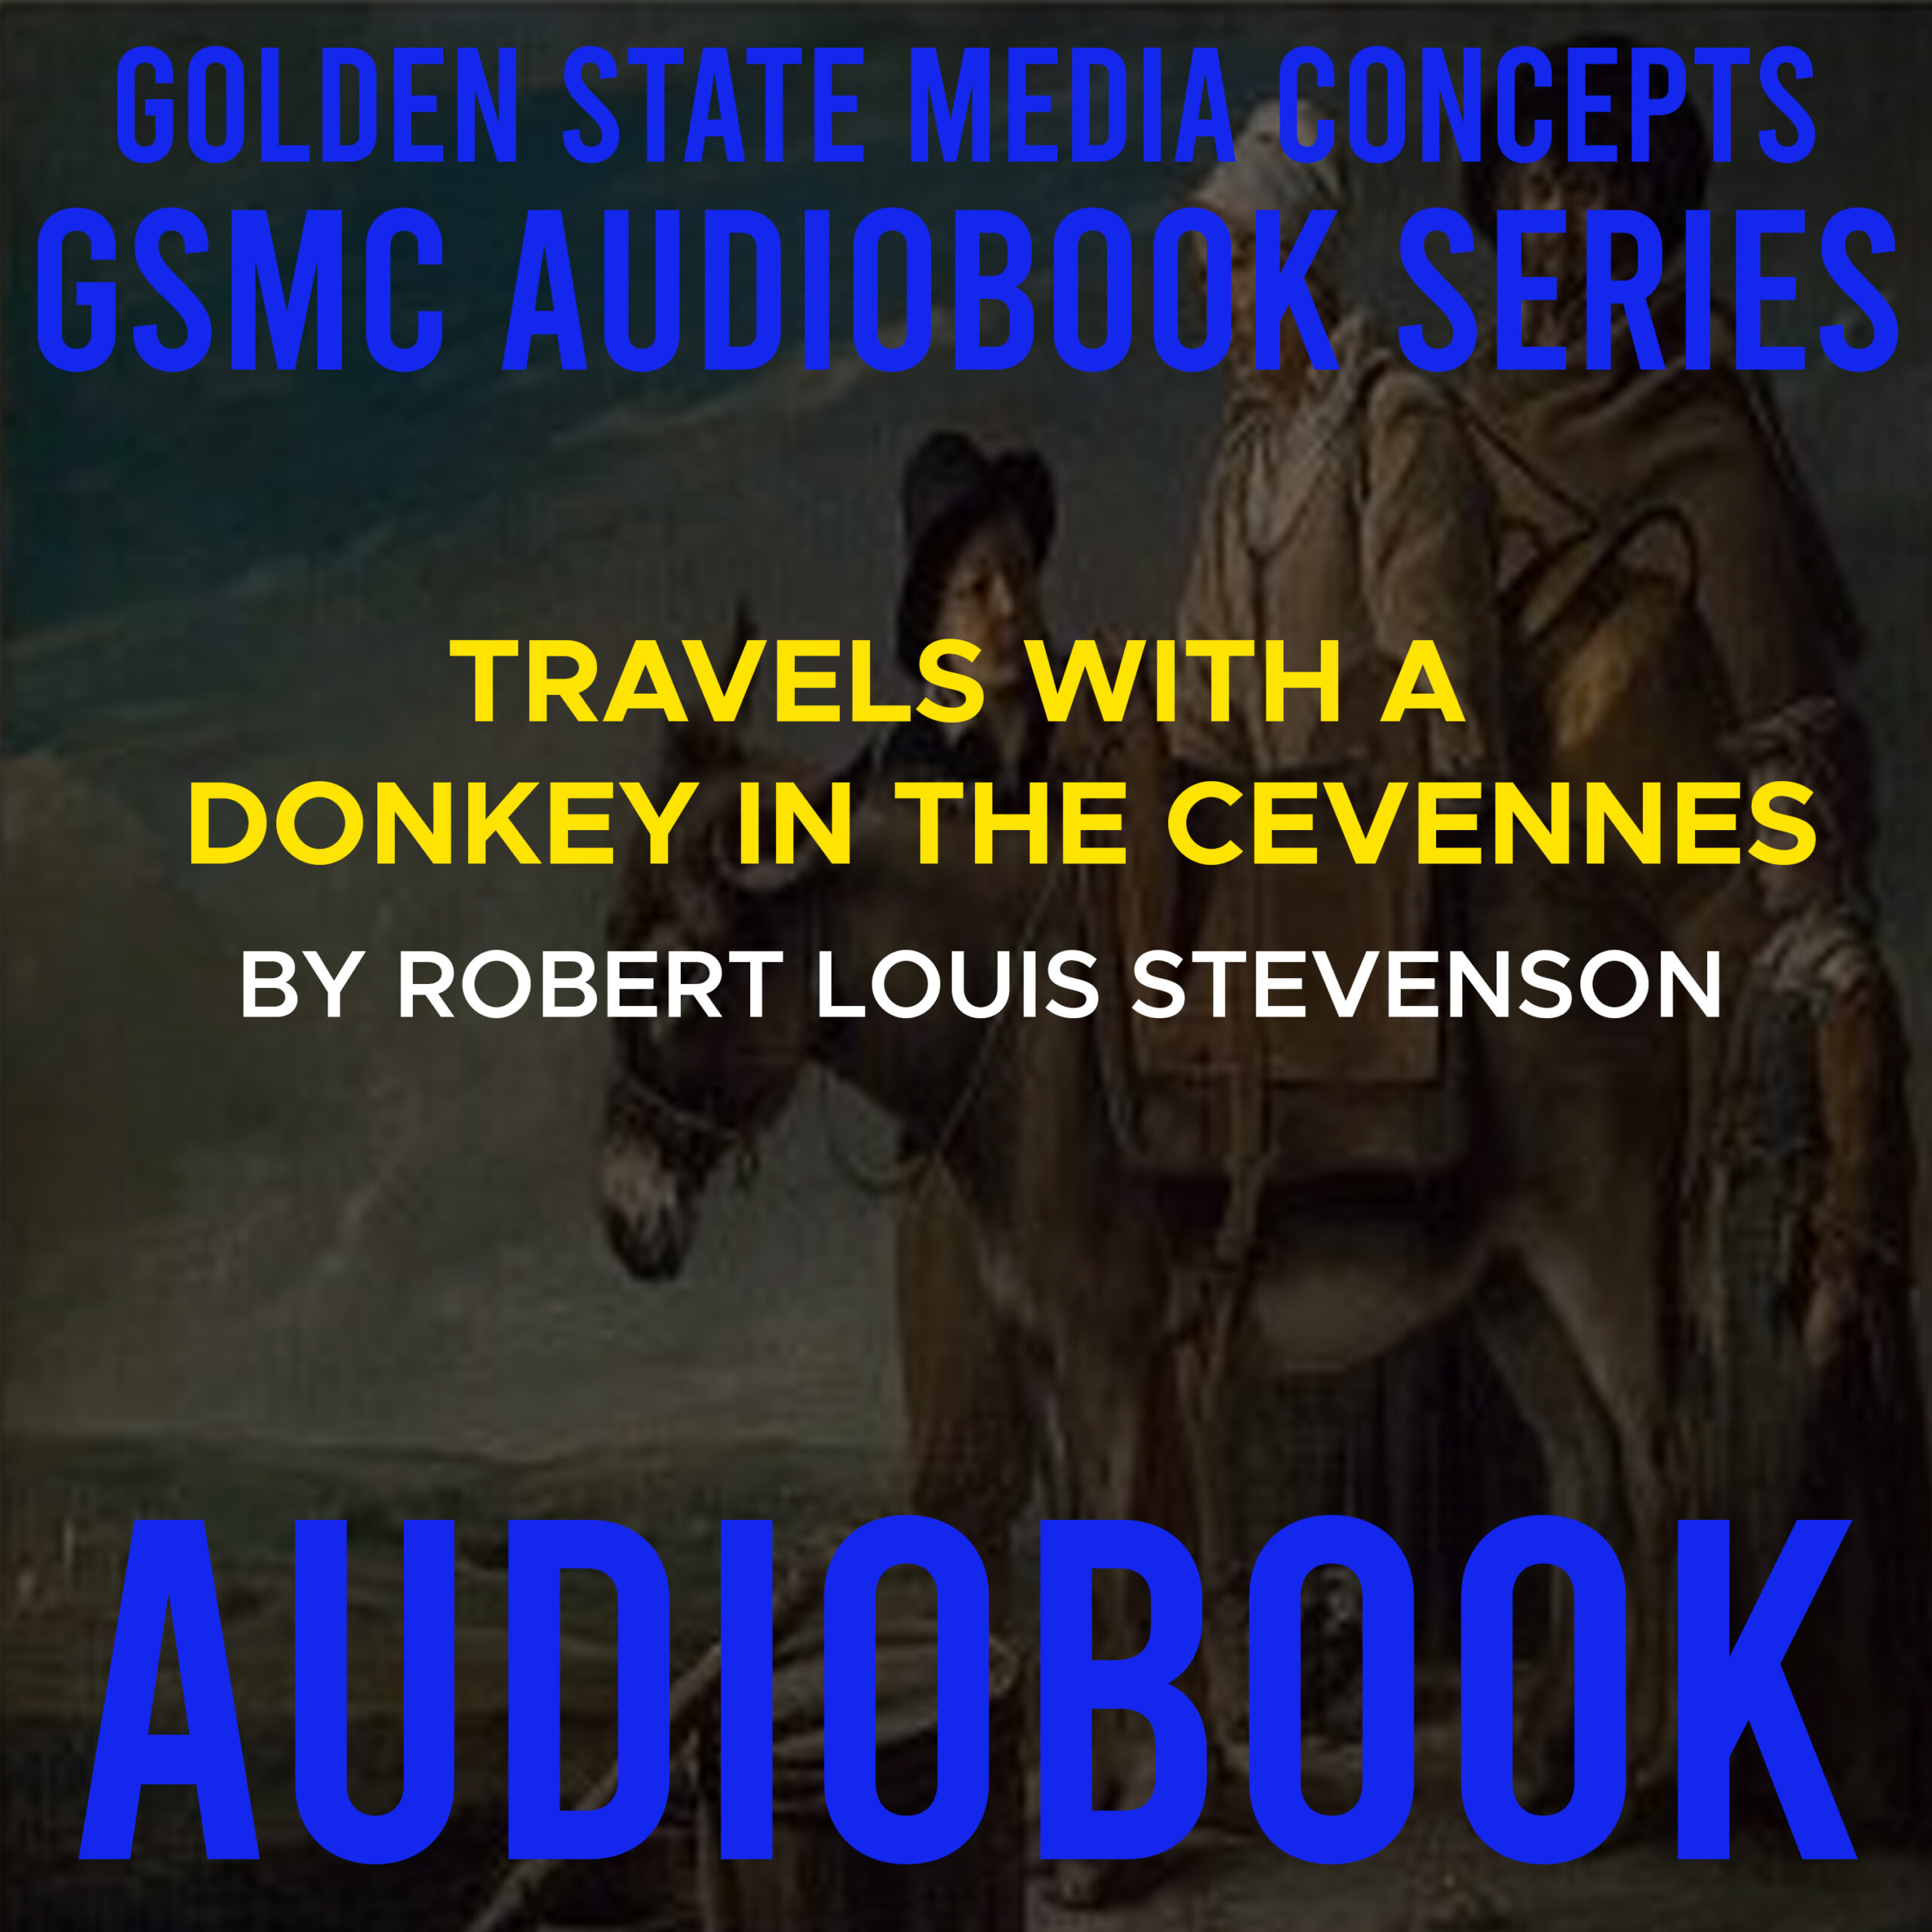 GSMC Audiobook Series: Travels with a Donkey in the Cevennes by Robert Louis Stevenson